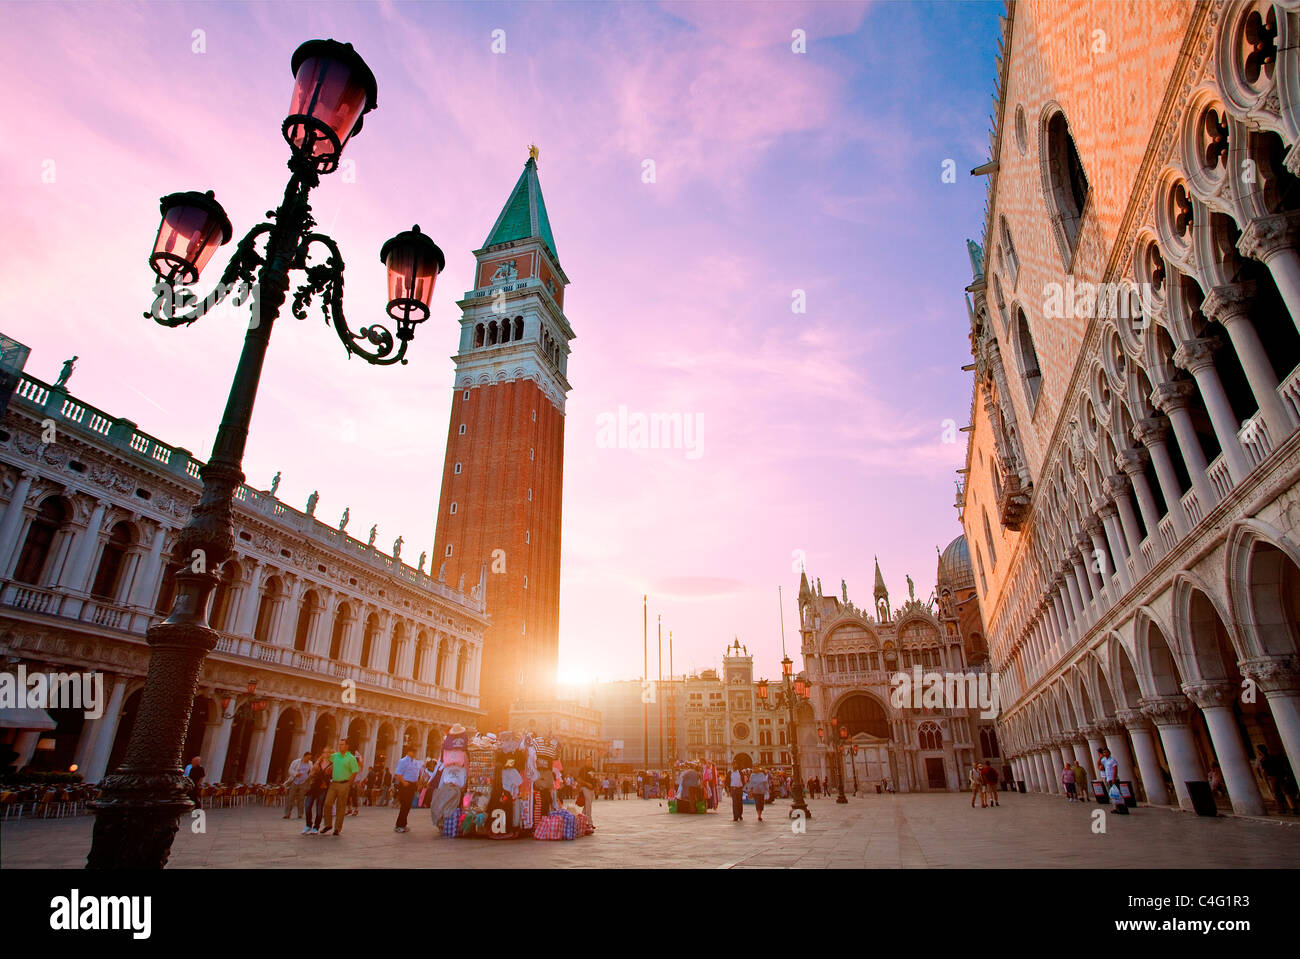 Venice, Piazza San marco at Sunset Stock Photo